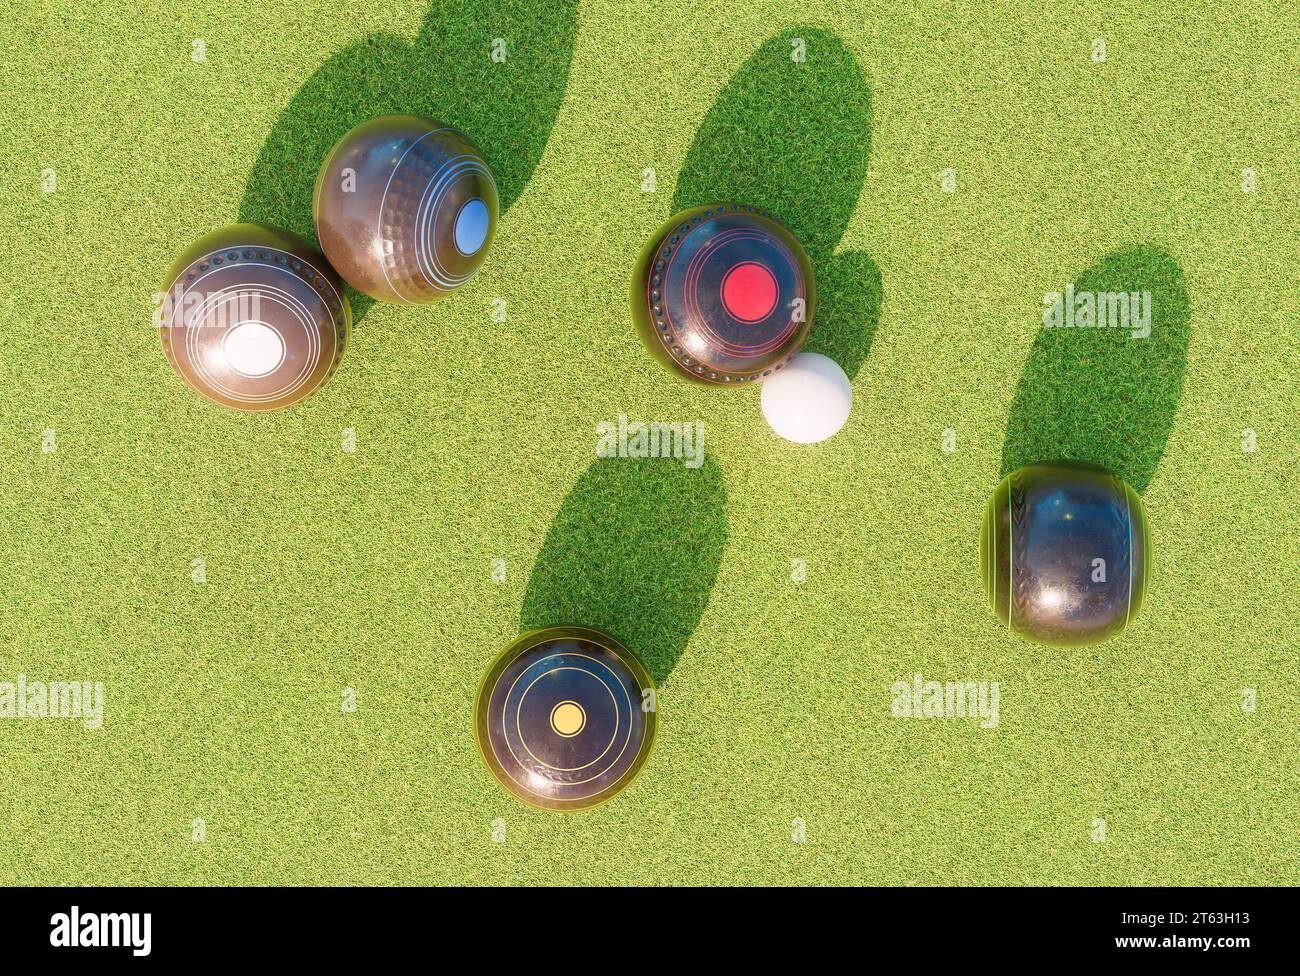 A set of old wooden lawn bowls next to a jack on a perfect flat green grass lawn outdoors - 3D render Stock Photo